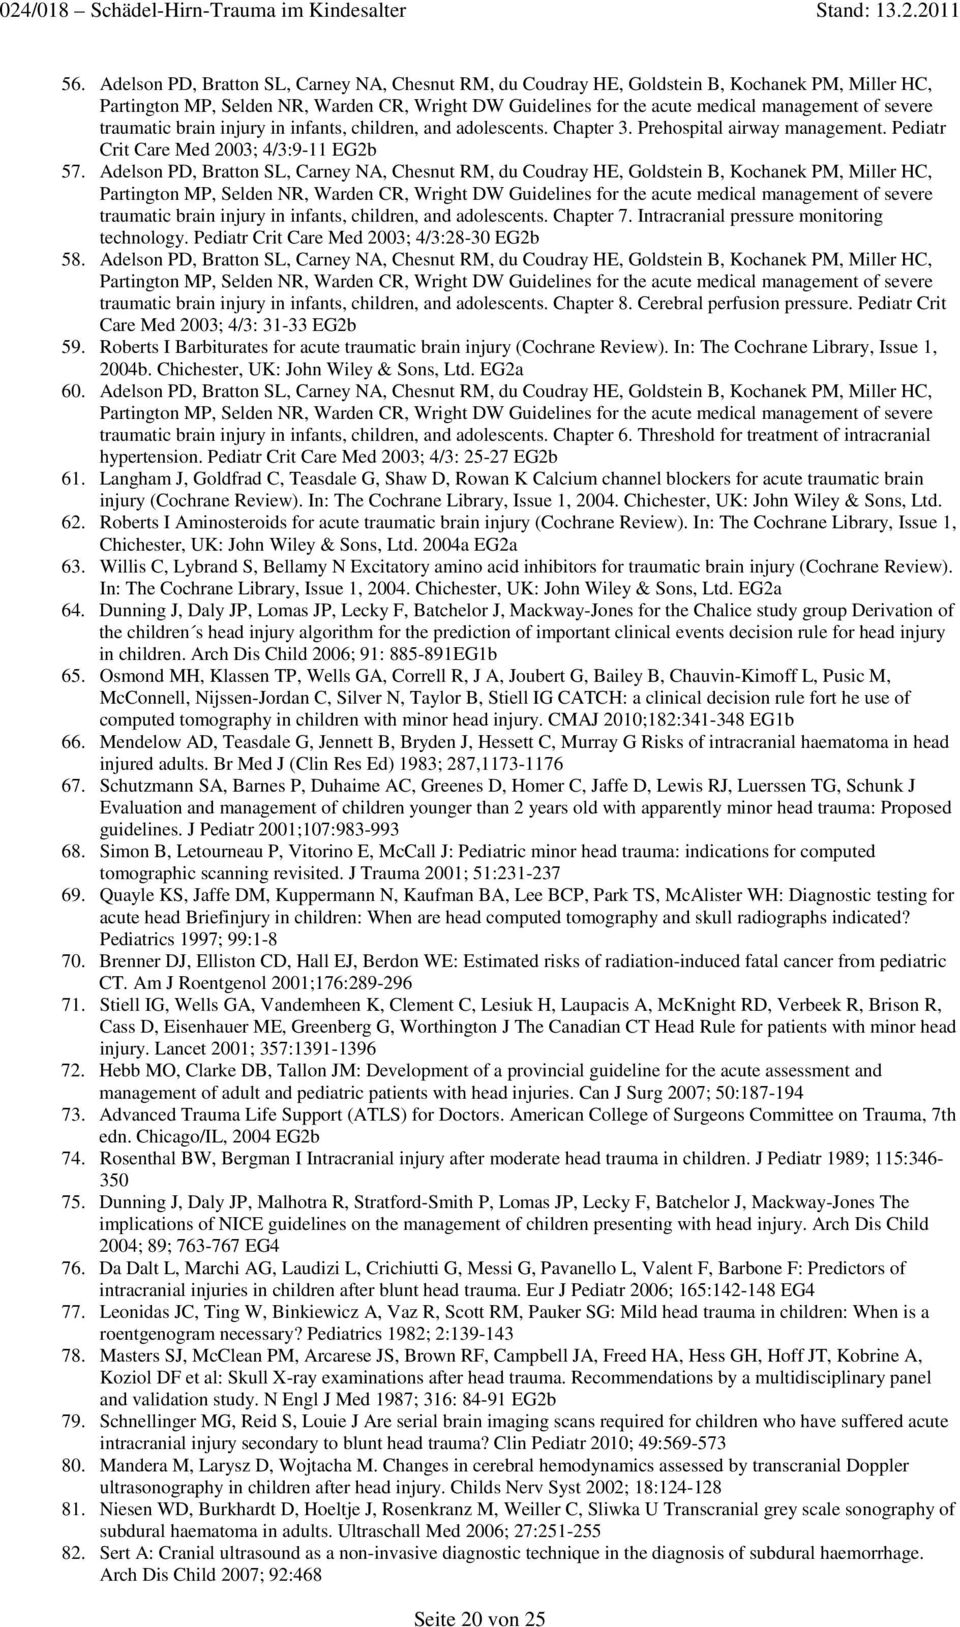 Adelson PD, Bratton SL, Carney NA, Chesnut RM, du Coudray HE, Goldstein B, Kochanek PM, Miller HC, traumatic brain injury in infants, children, and adolescents. Chapter 7.